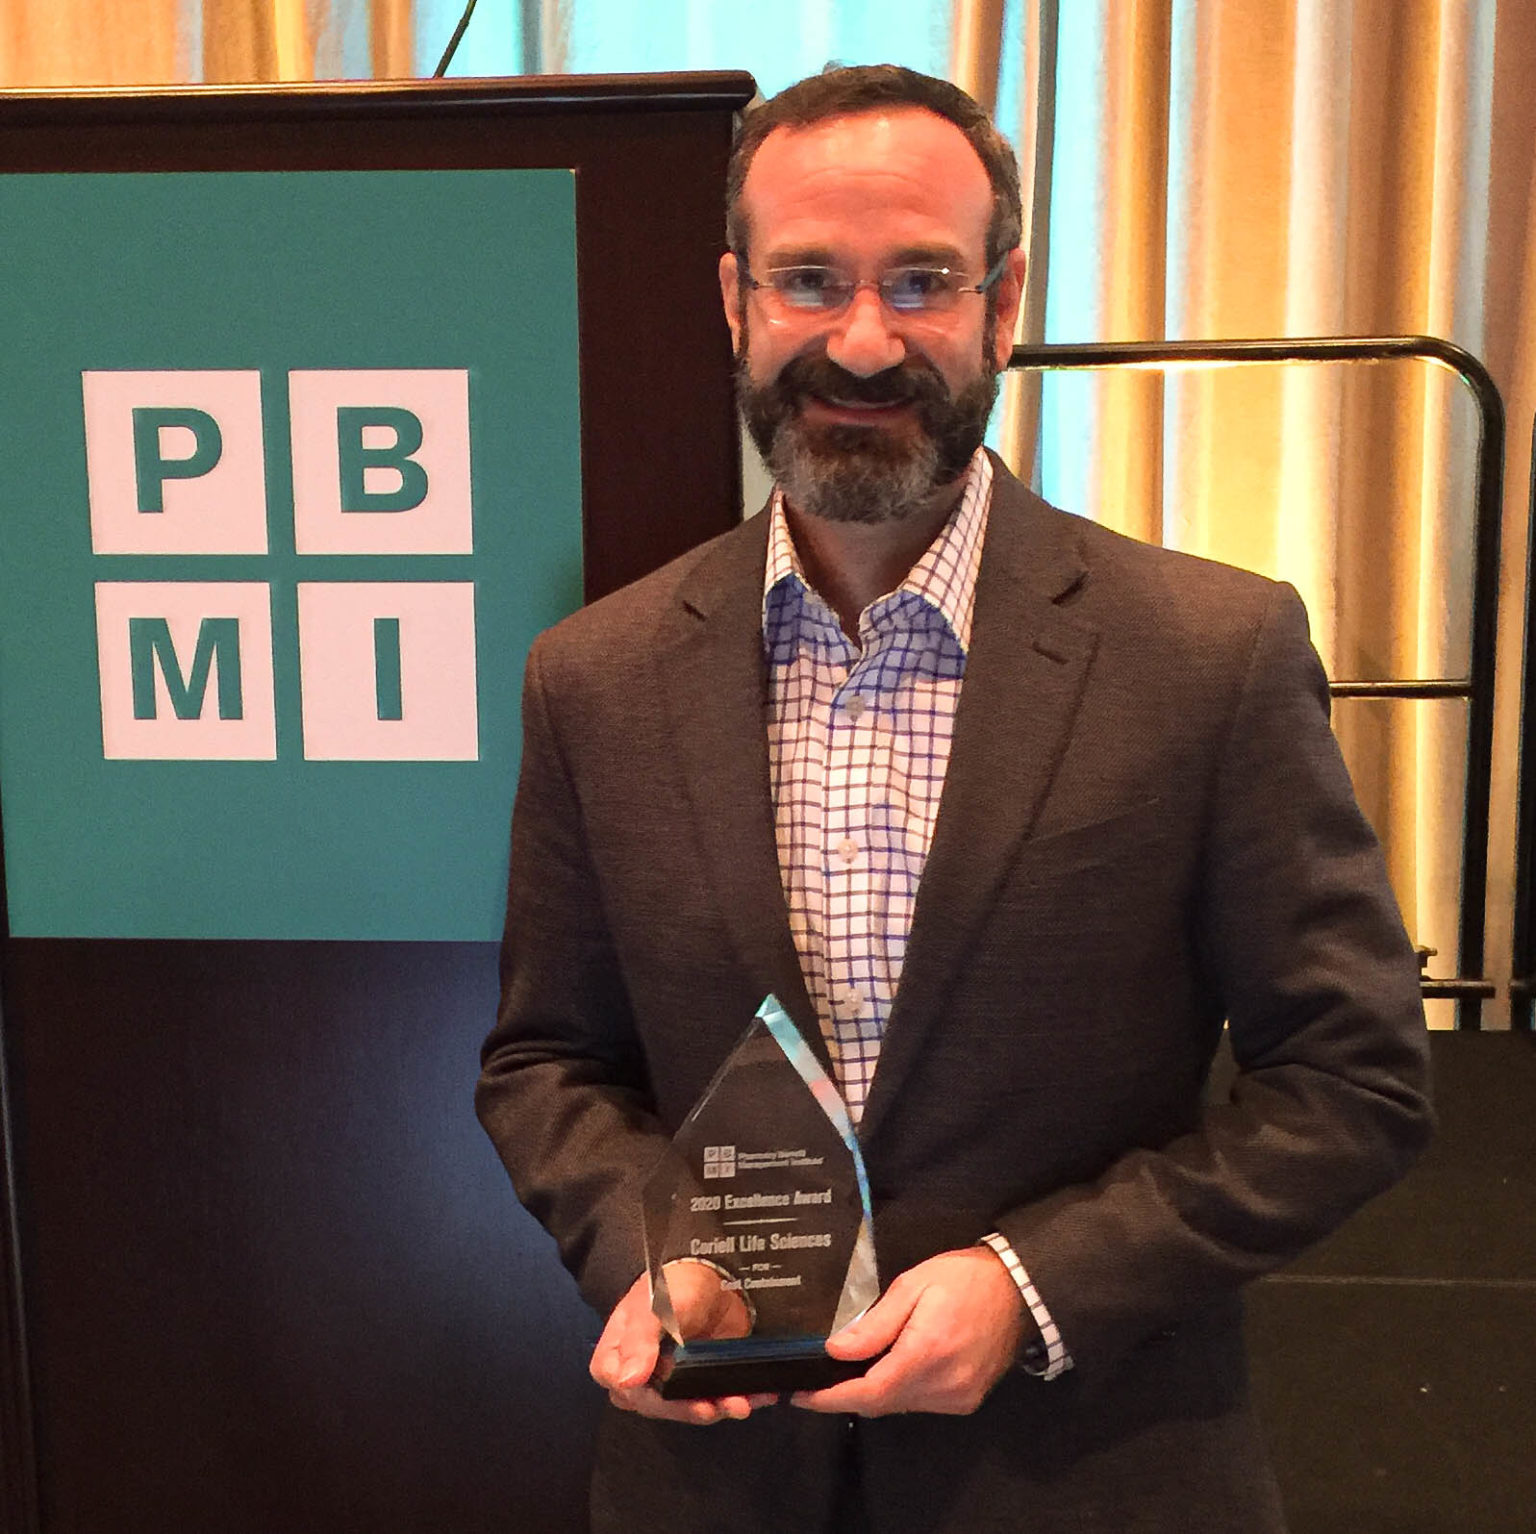 Newswise: Coriell Life Sciences Wins PBMI Excellence Award